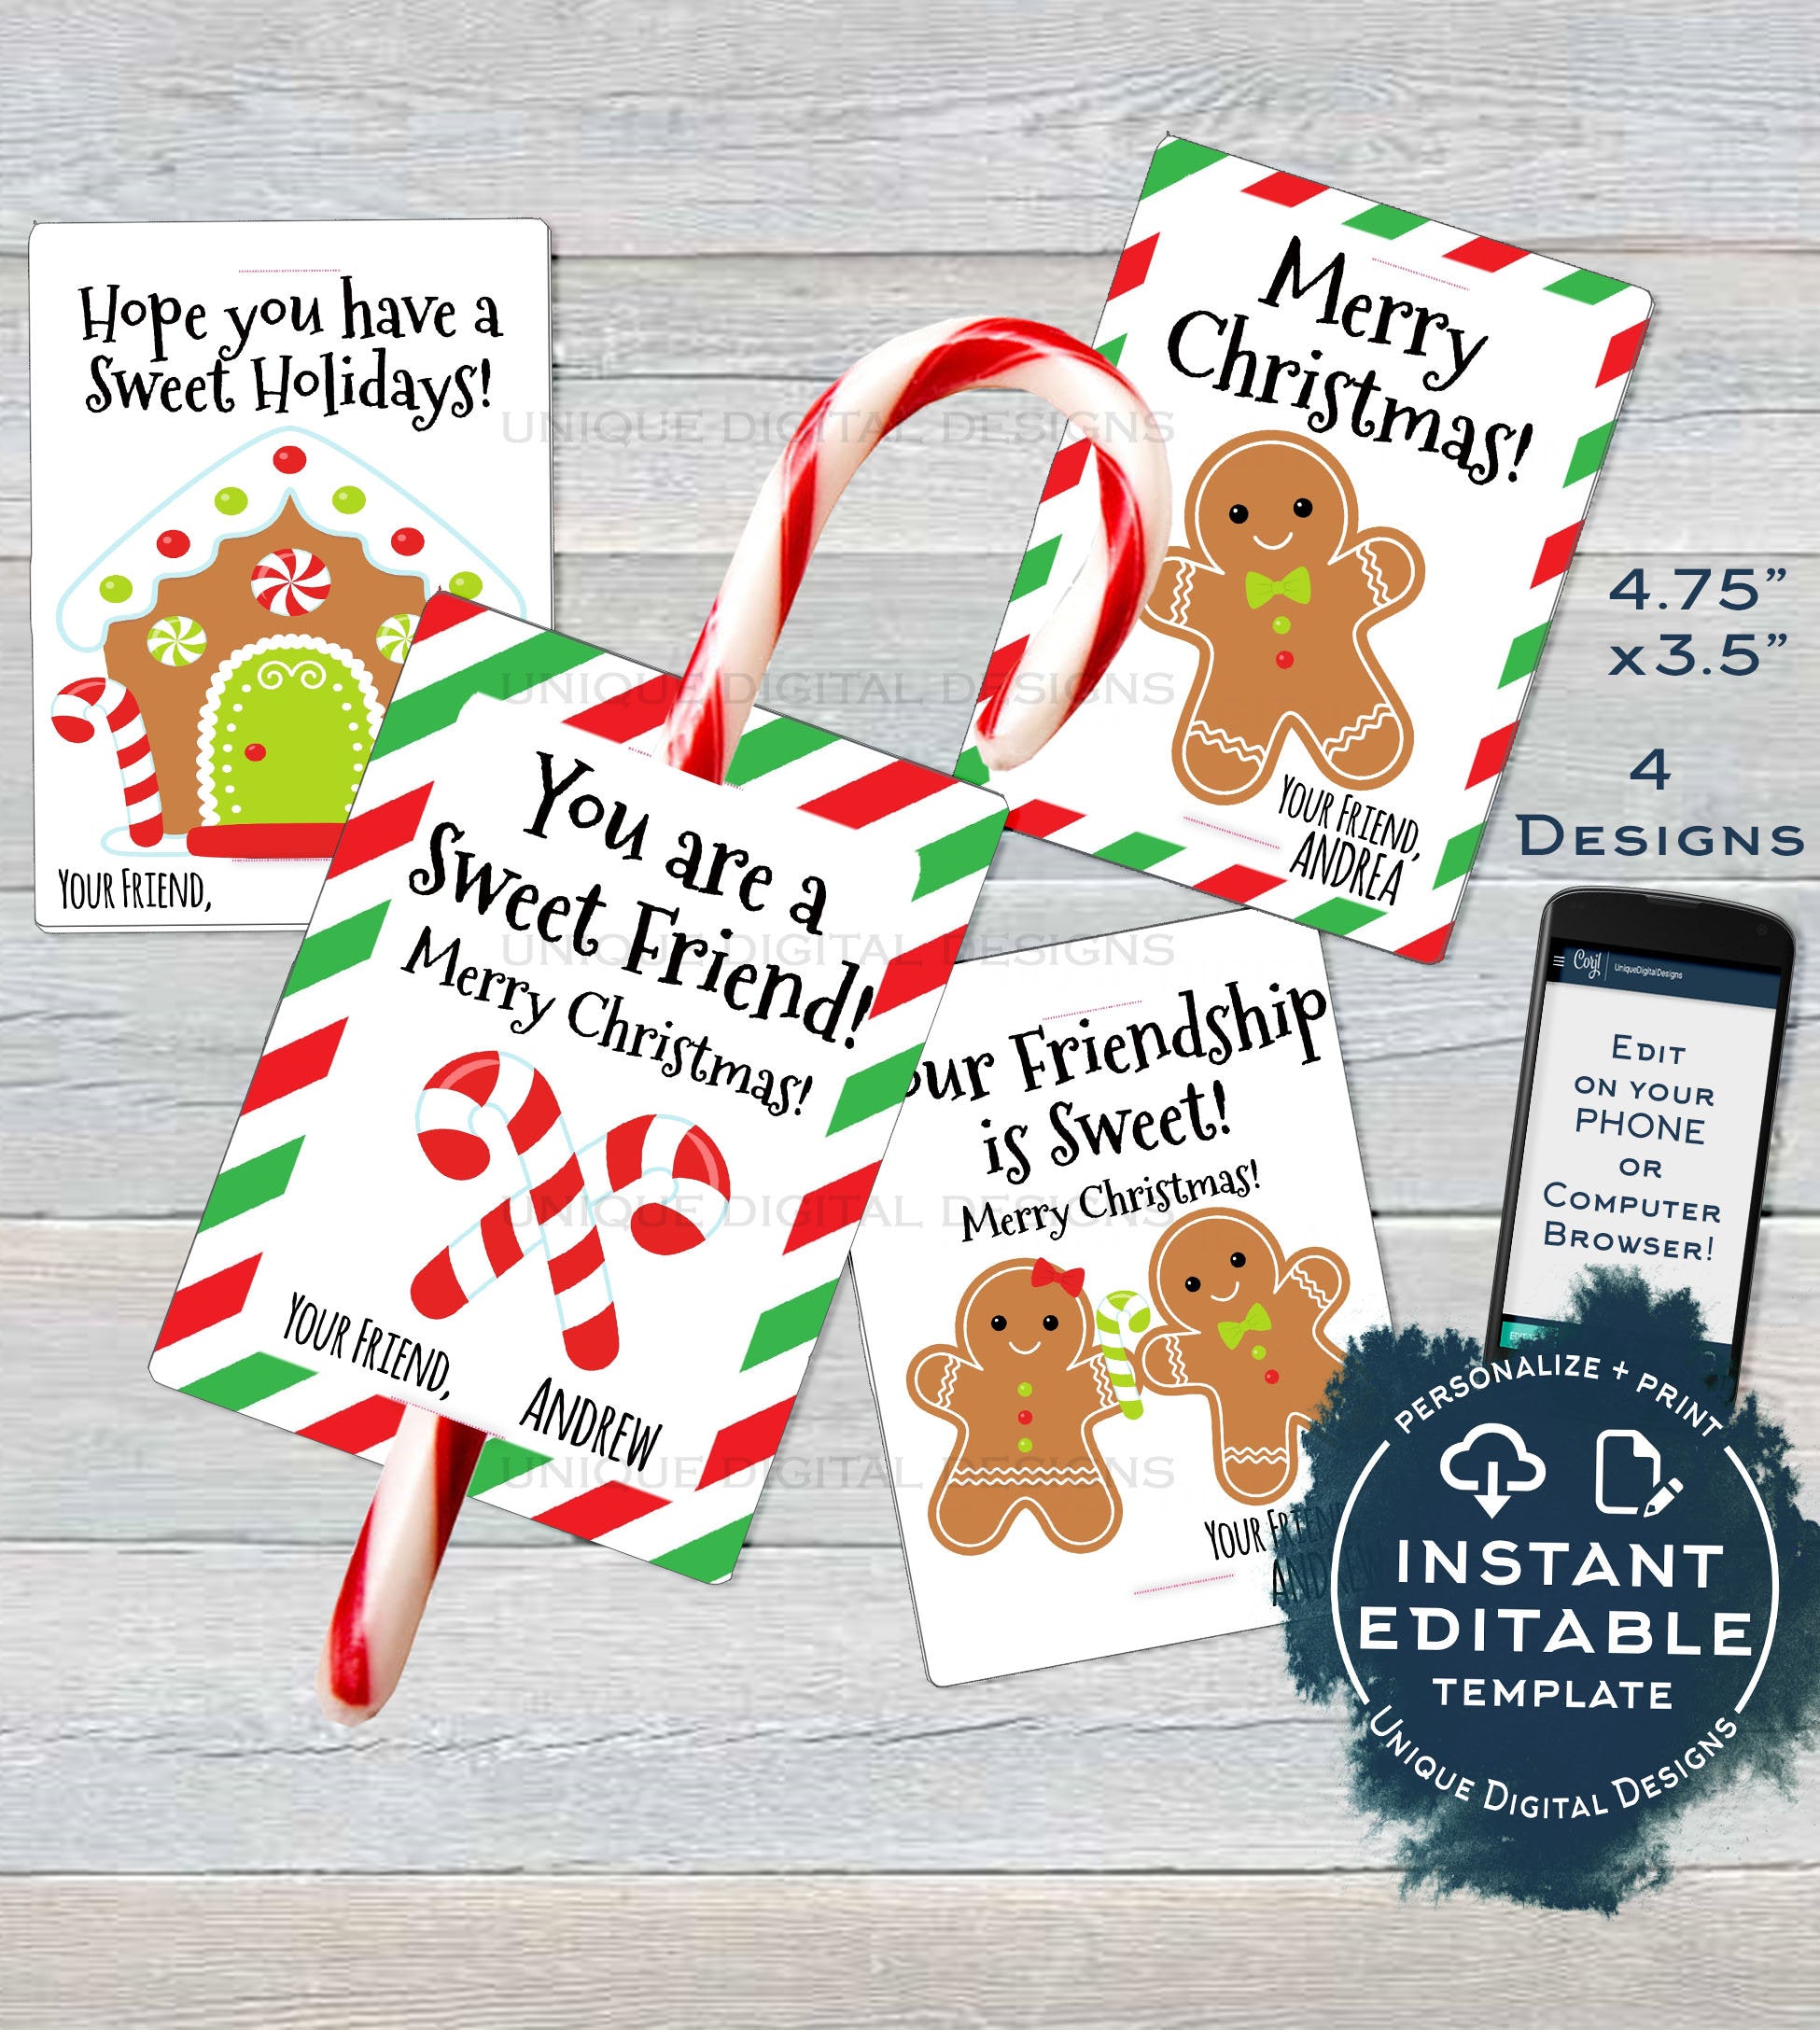 student holiday gift tags